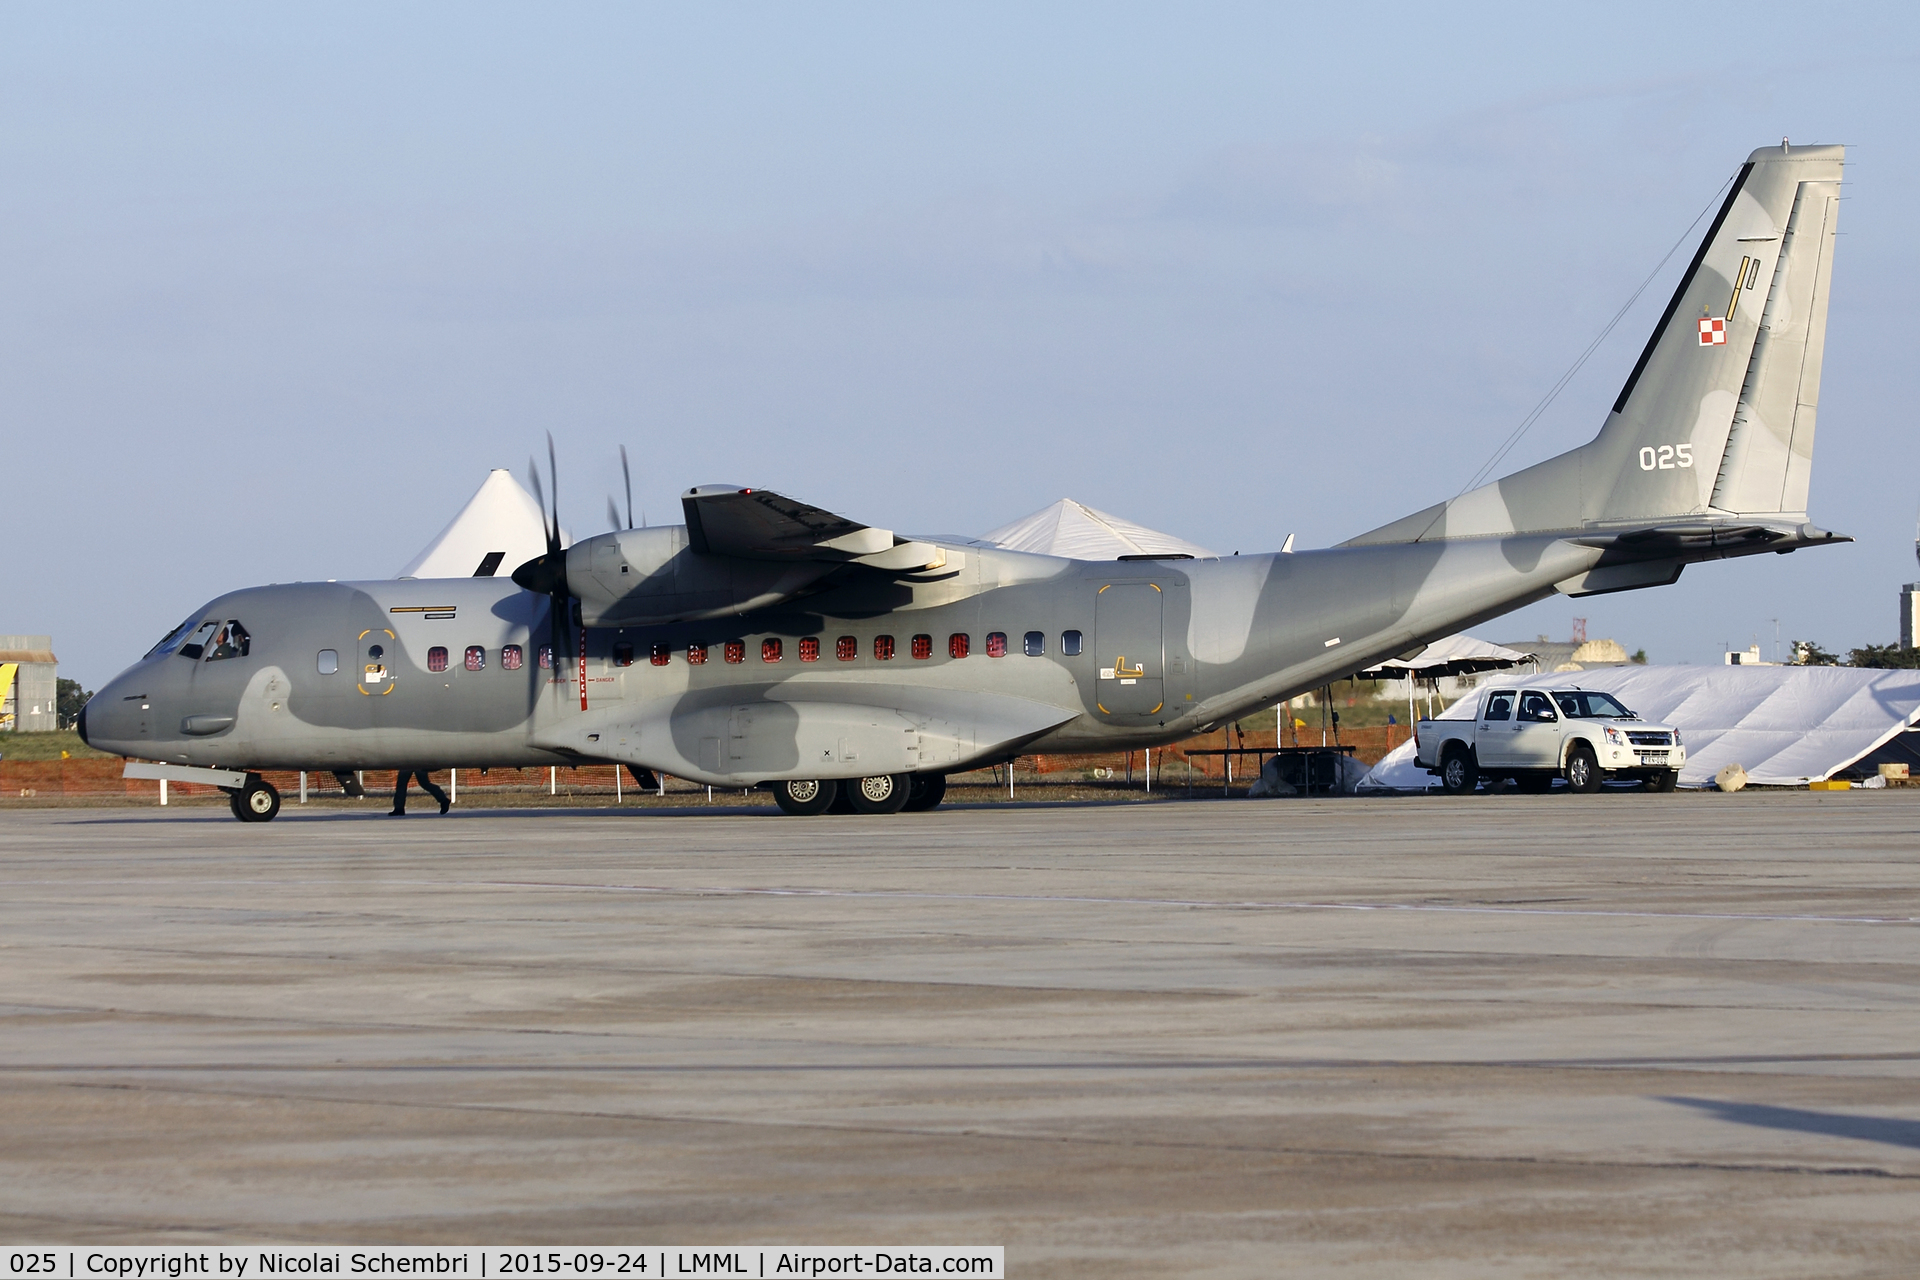 025, CASA C-295M C/N S-025, Support aircraft for the Polish Air Force Orlik team